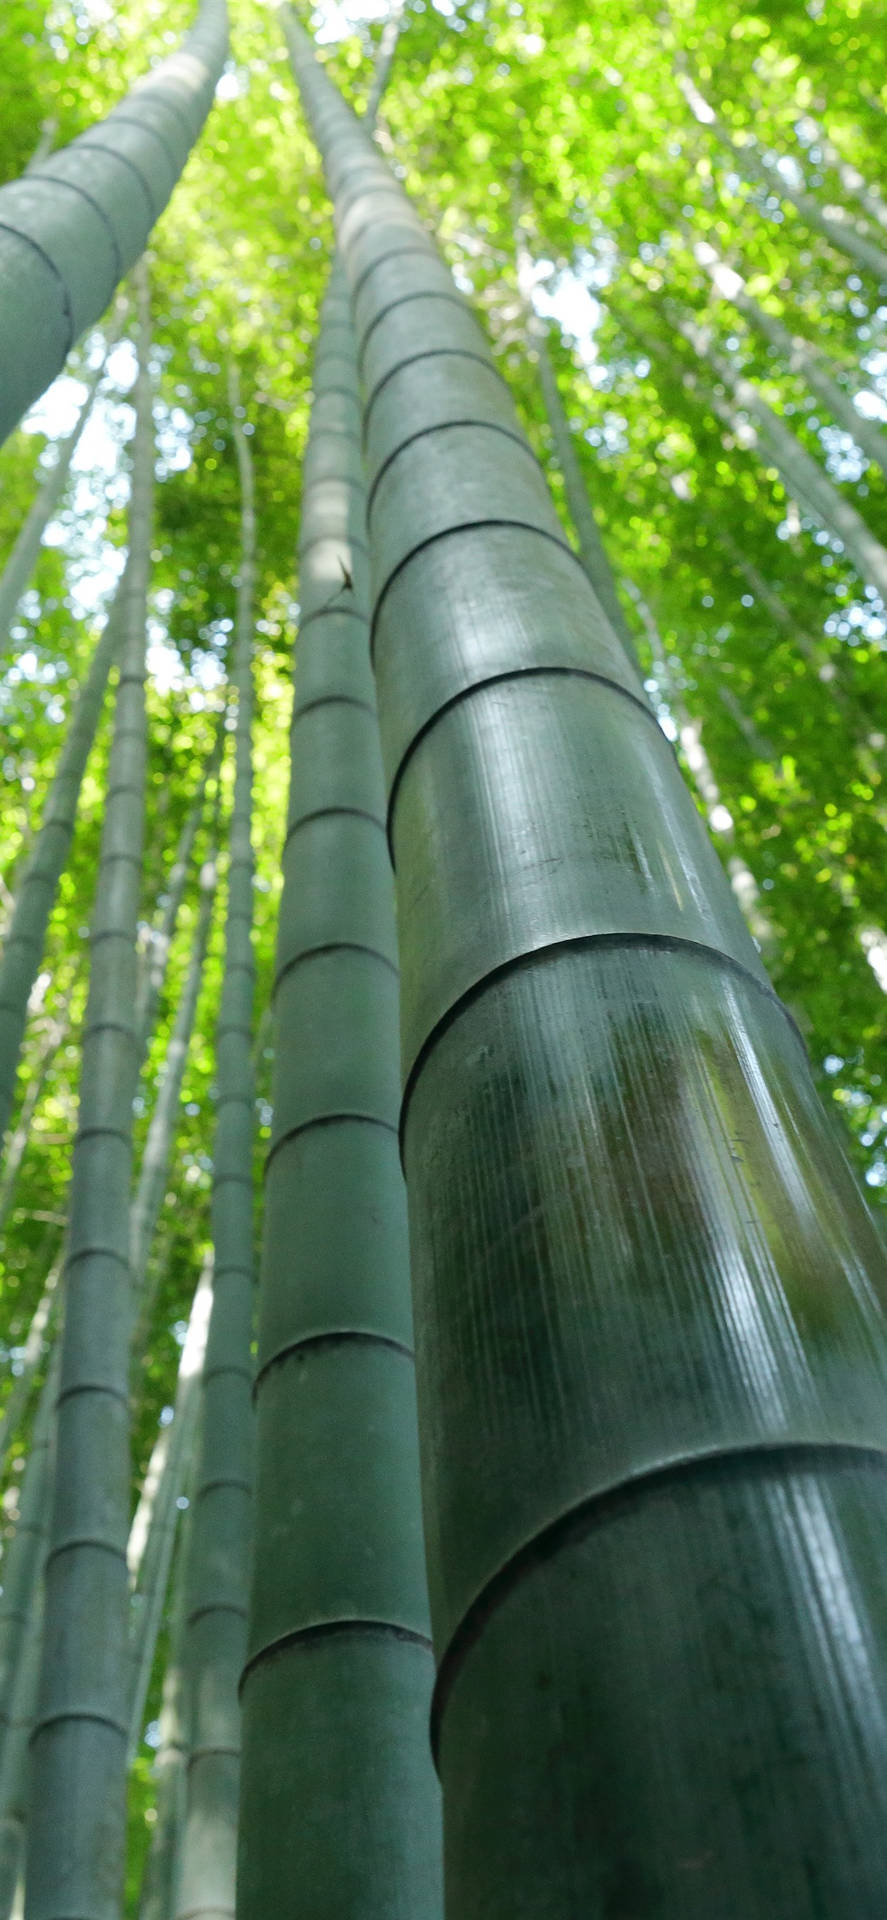 Caption: Close-up Of Bamboo Texture For Iphone